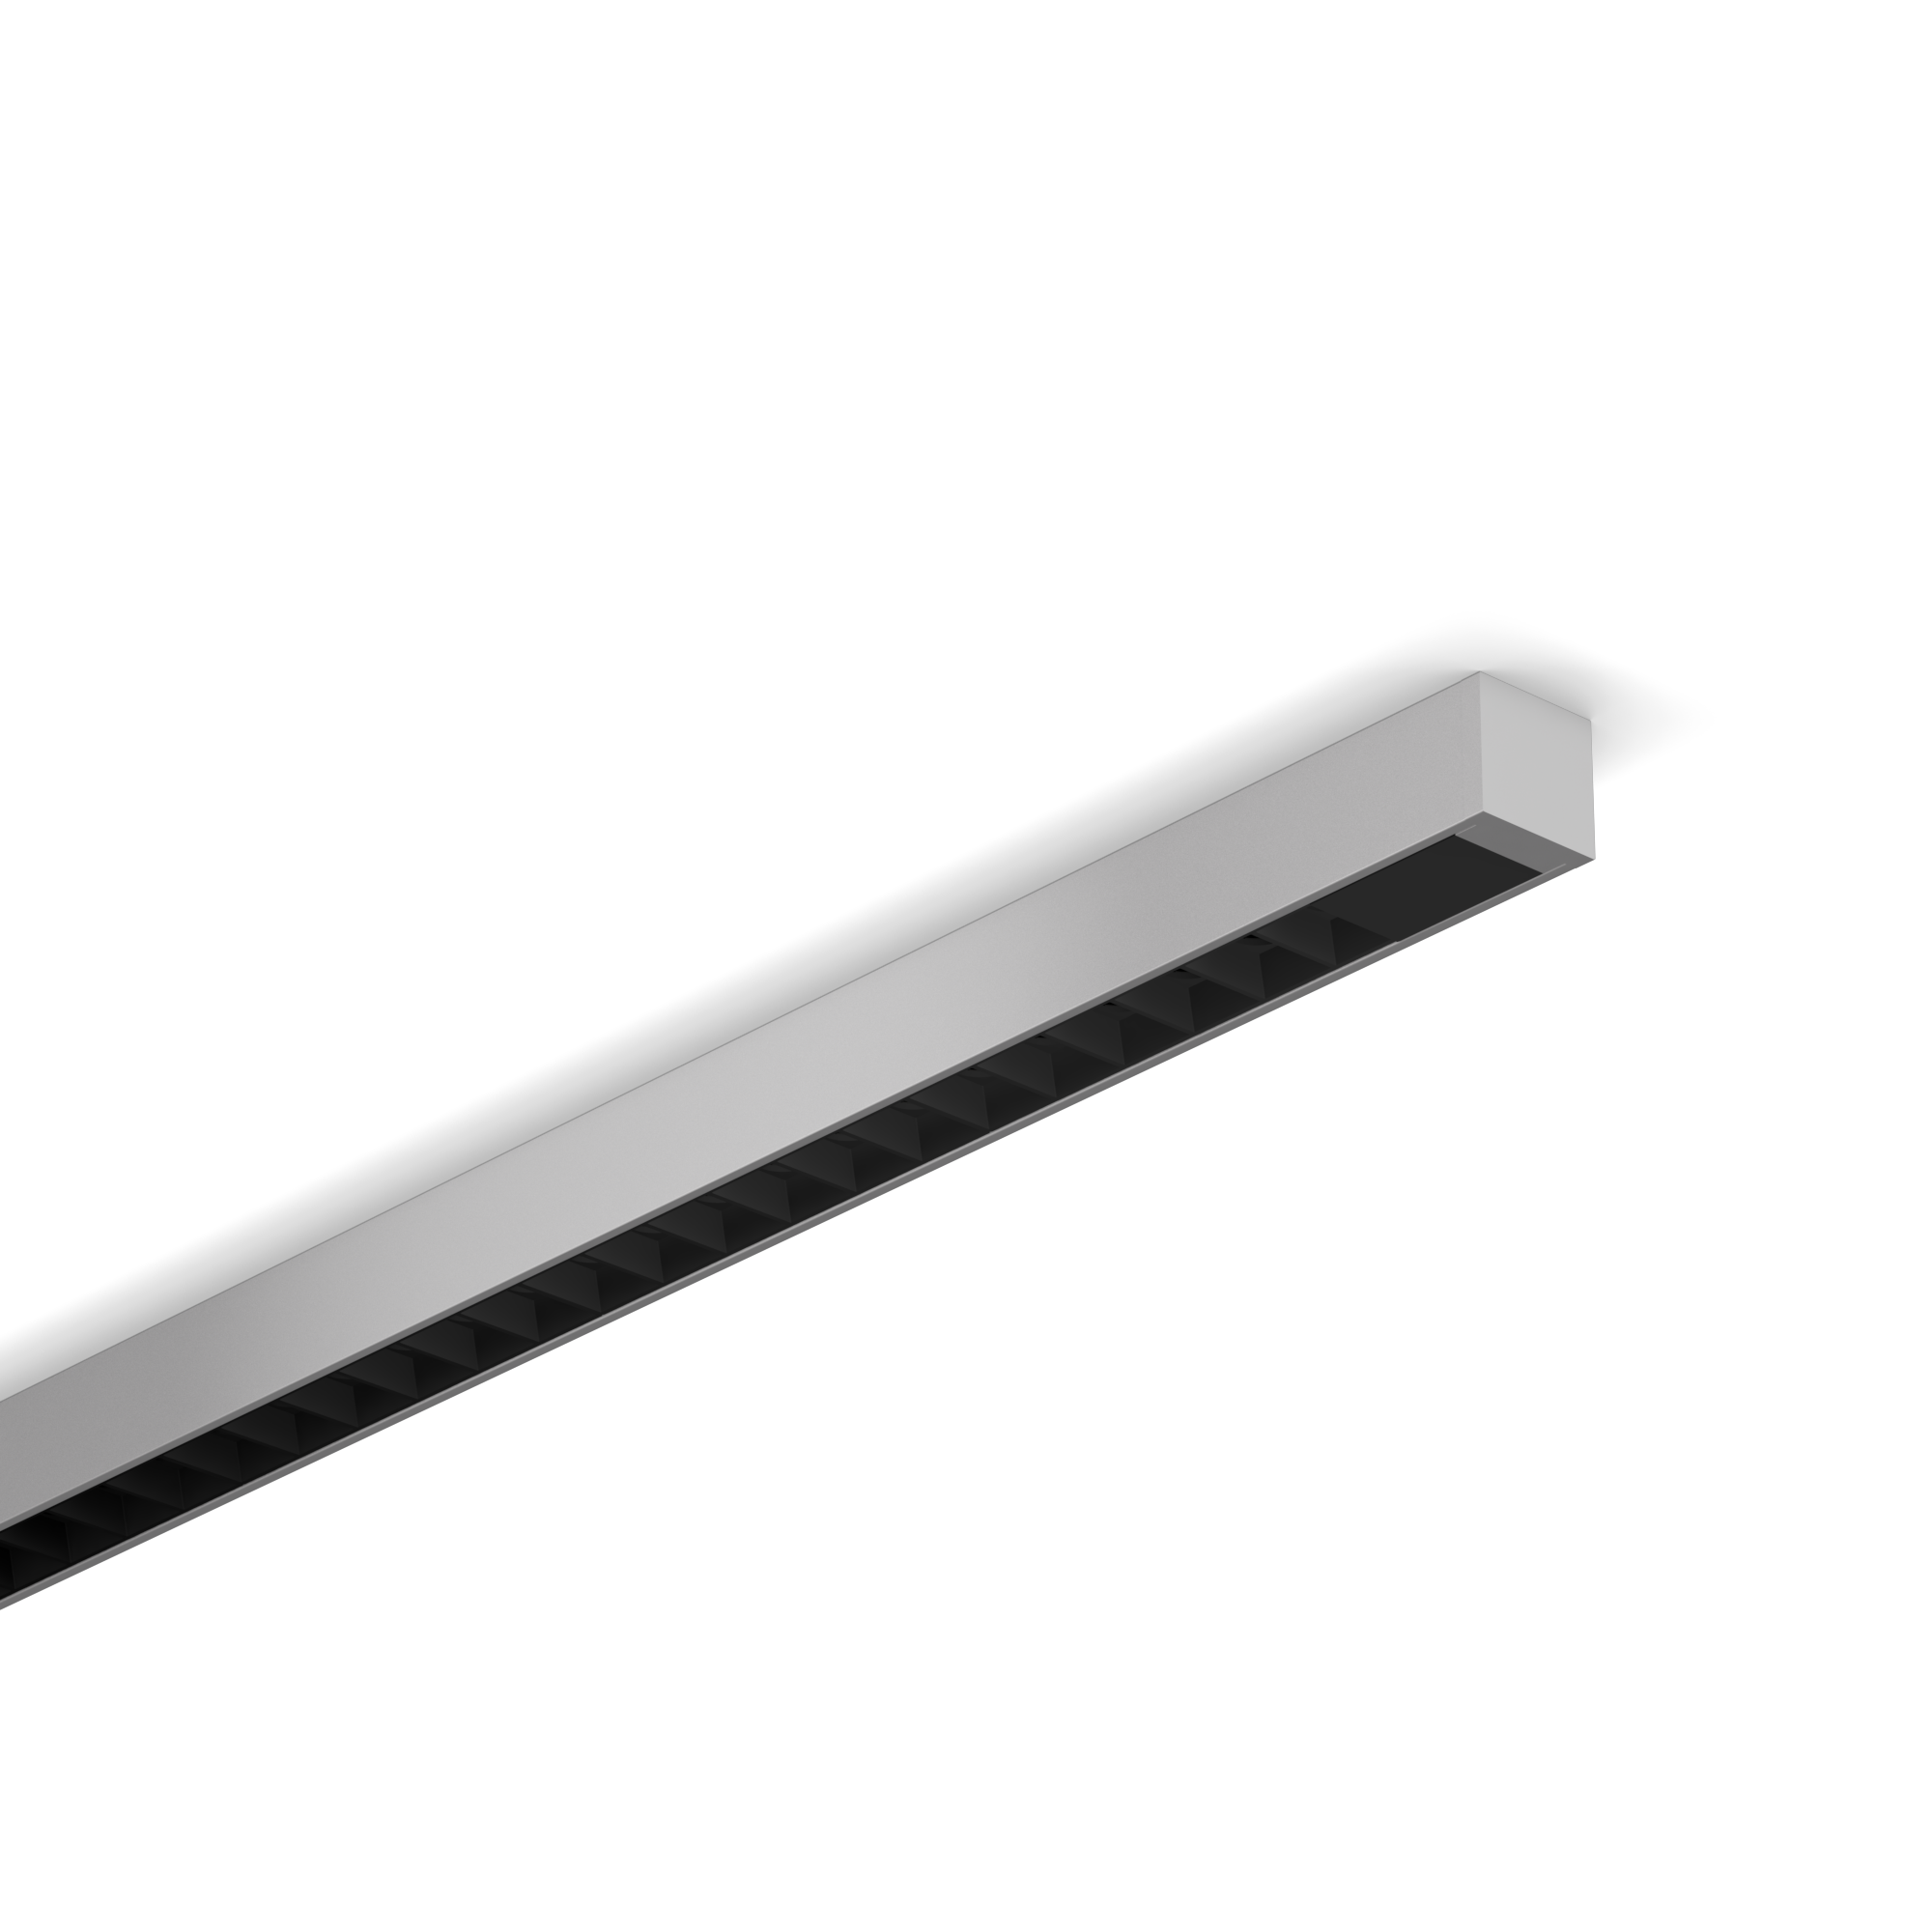 0.95” Ultra-Compact LED Linear with Nano Cavity Optics (NCO)
NANOSquare is 0.95” square, bringing SmartBeam® capabilities to a graphic scale that complements architectural space. NANOSquare features a remote driver to remove visual bulk. Optional Individual lenses and parabolic reflectors are located below each LED using Nano-Cavity Optics (NCO). For greater comfort, the regulated beam lowers glare and adjusts light output. These concentrated distributions are ideal for a wide range of taskspecific requirements. At cut-off, NCO has a softer appearance, a larger beam spread, and a gradual brightness transition.

 